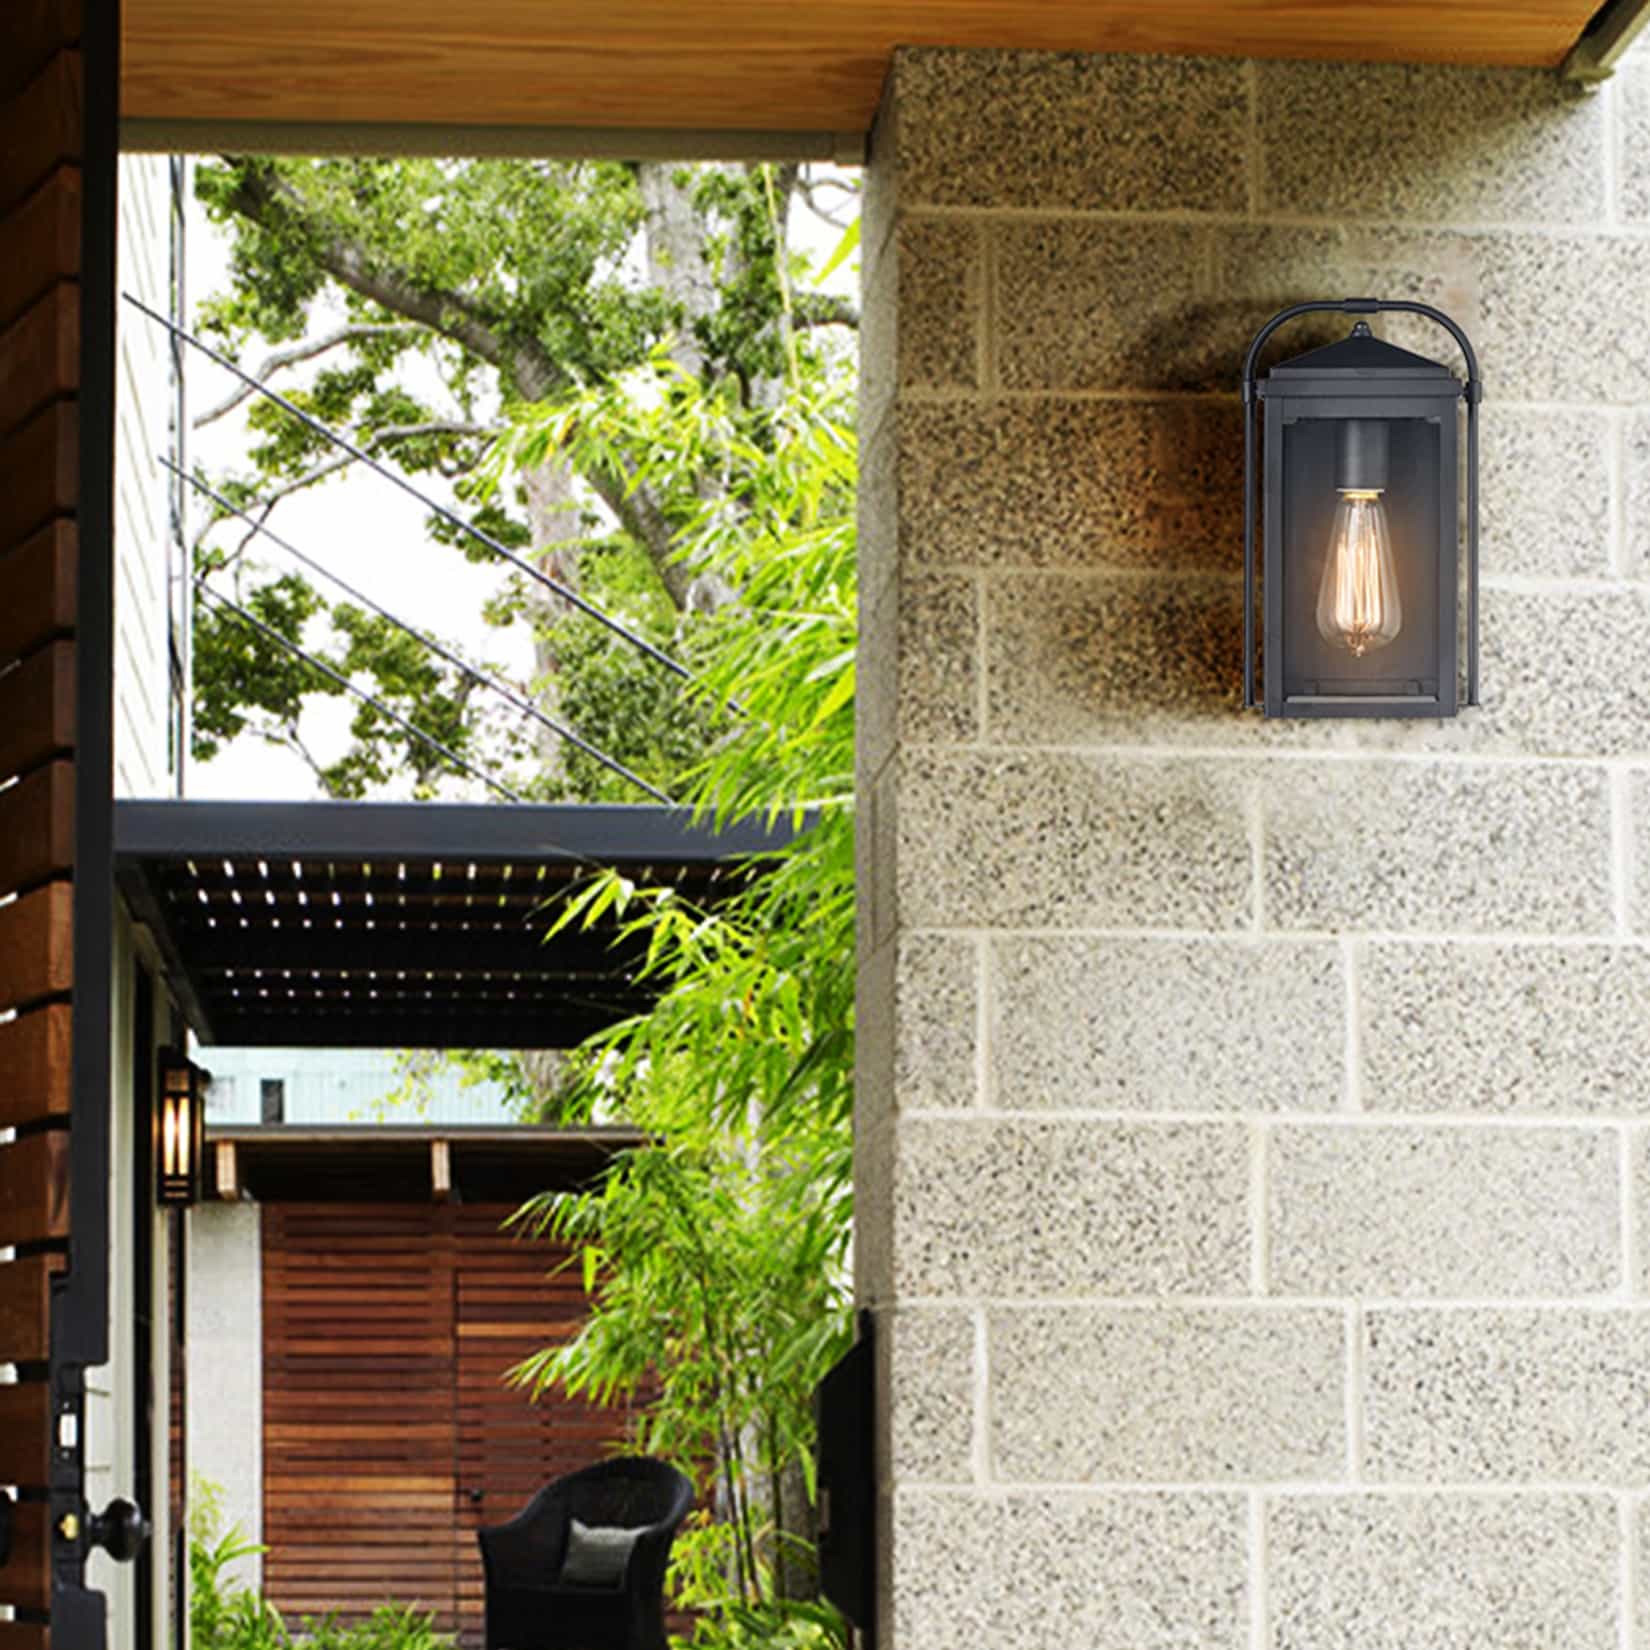 Black Outdoor Wall Lights Exterior Glass Shade Porch Light for House